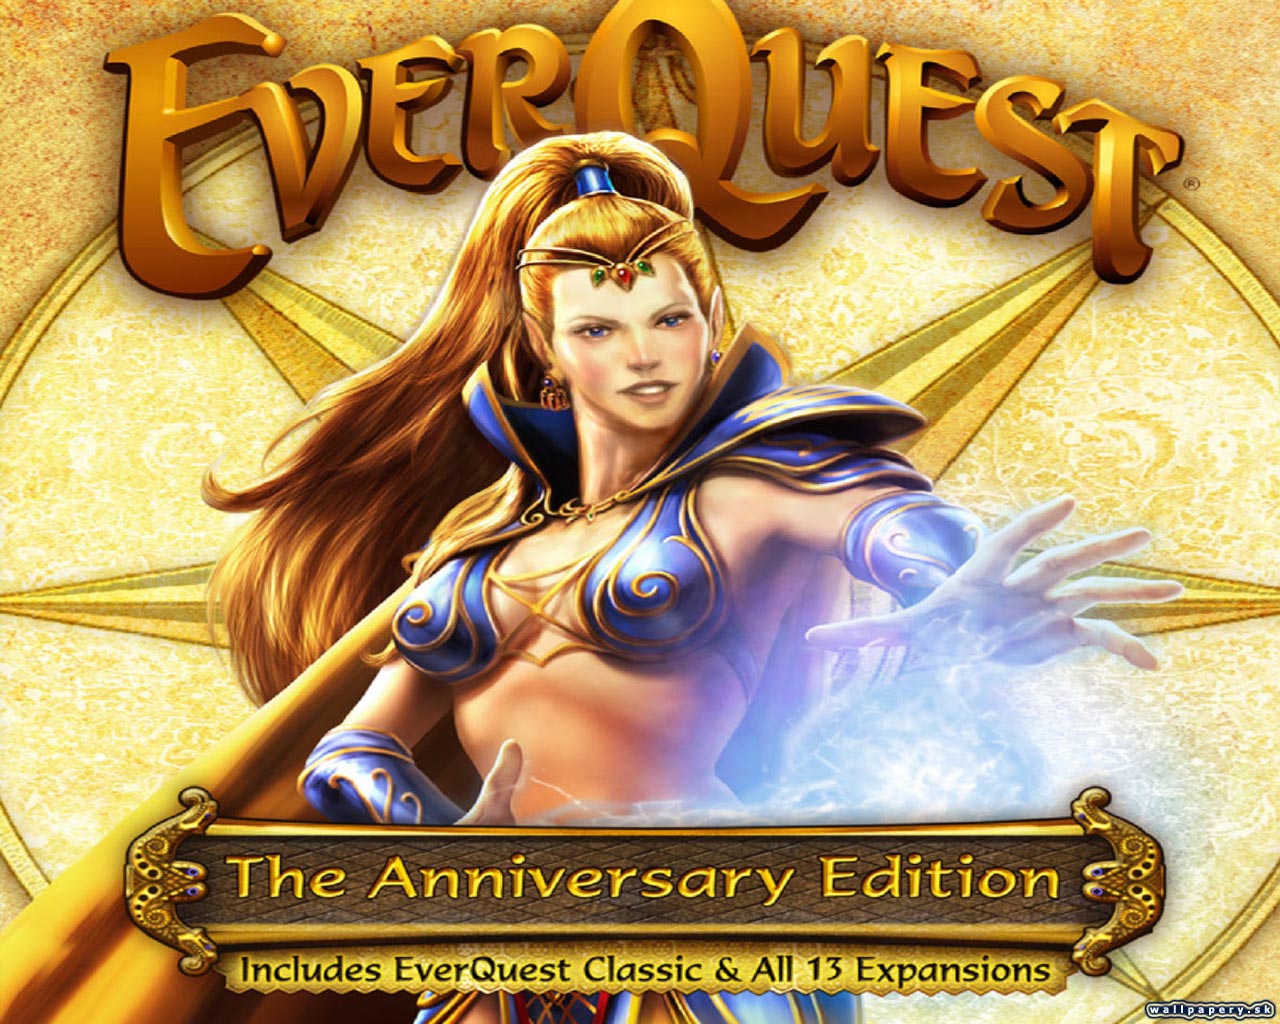 EverQuest: The Anniversary Edition - wallpaper 1